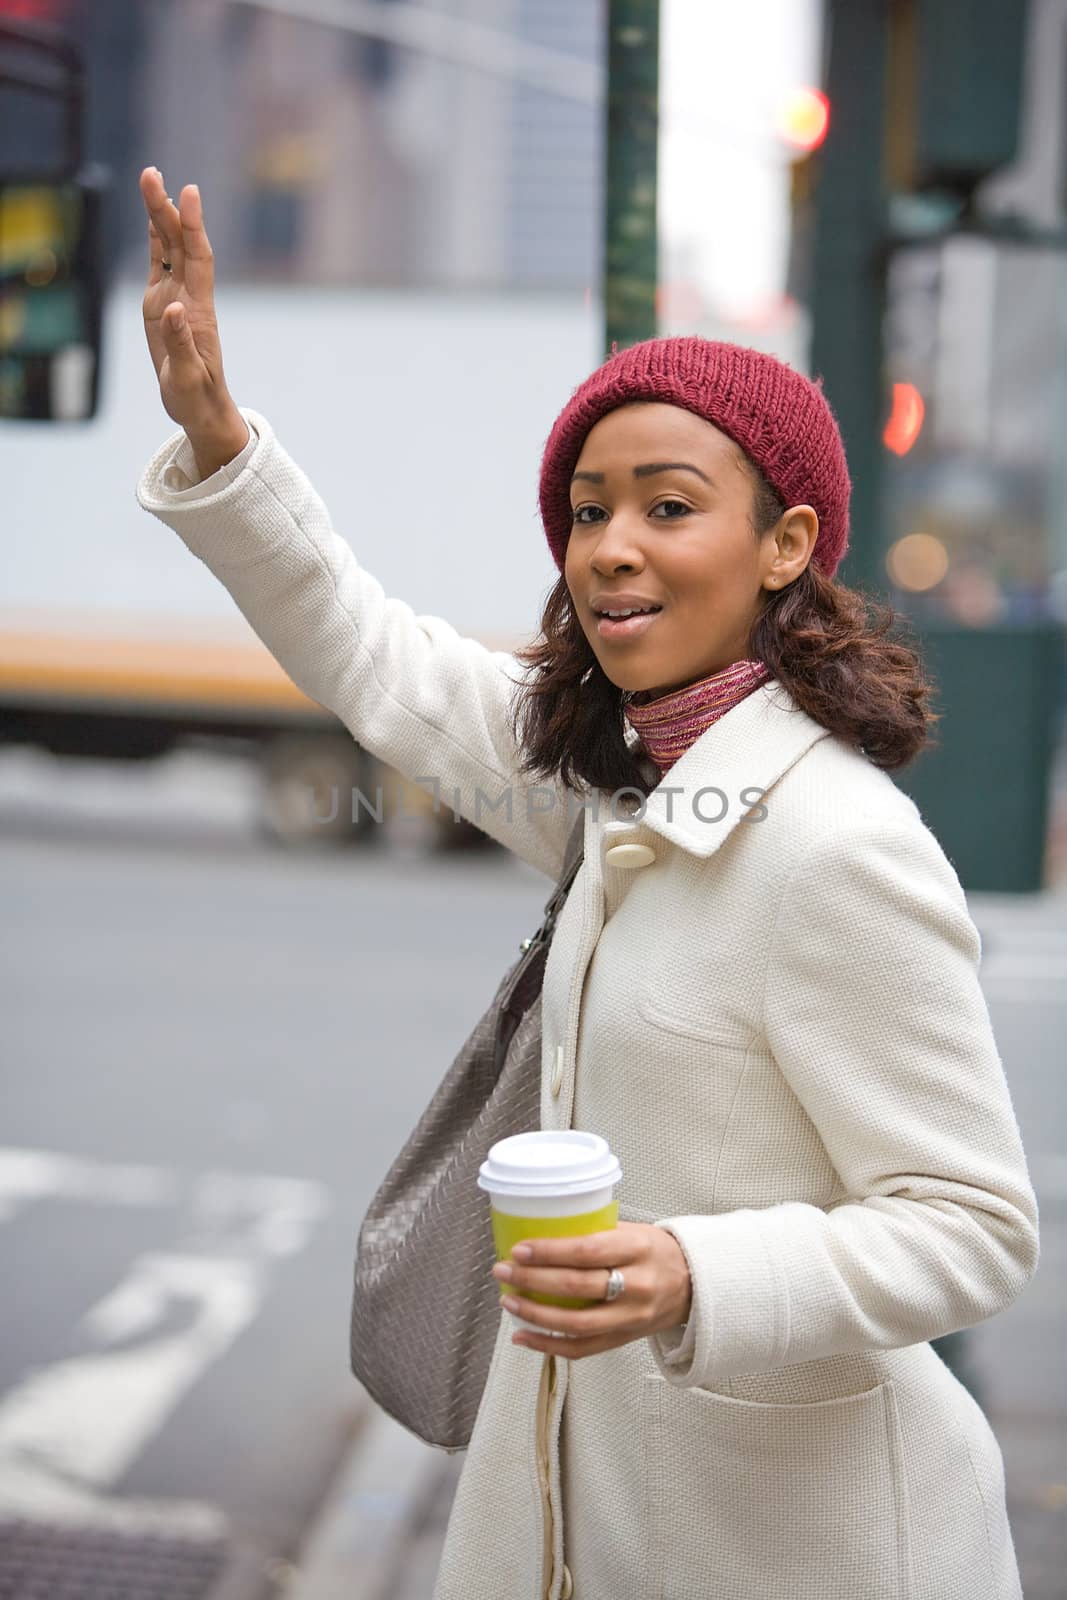 A pretty young business woman hails a taxi cab in the city.